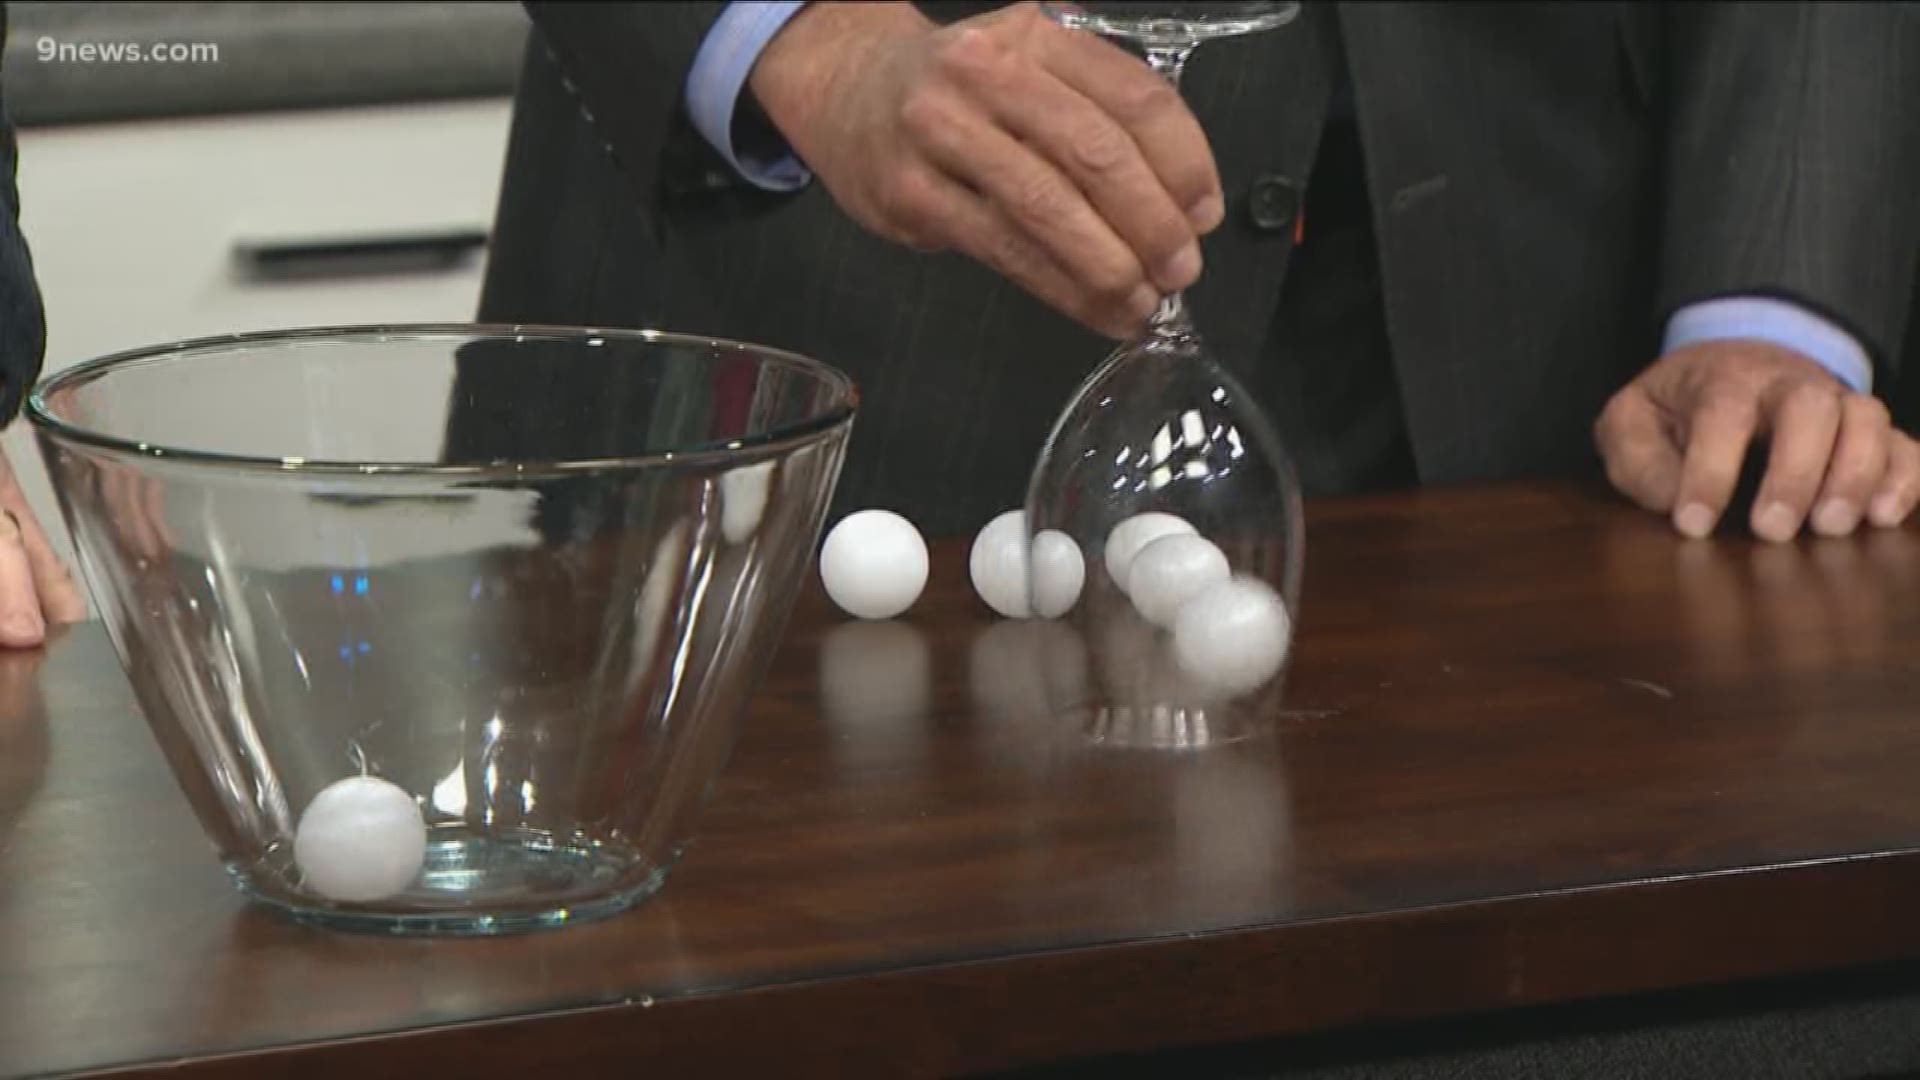 Our science guy Steve Spangler wants to make sure your New Year’s Eve party is overflowing with fun as you wait for the ball to drop.